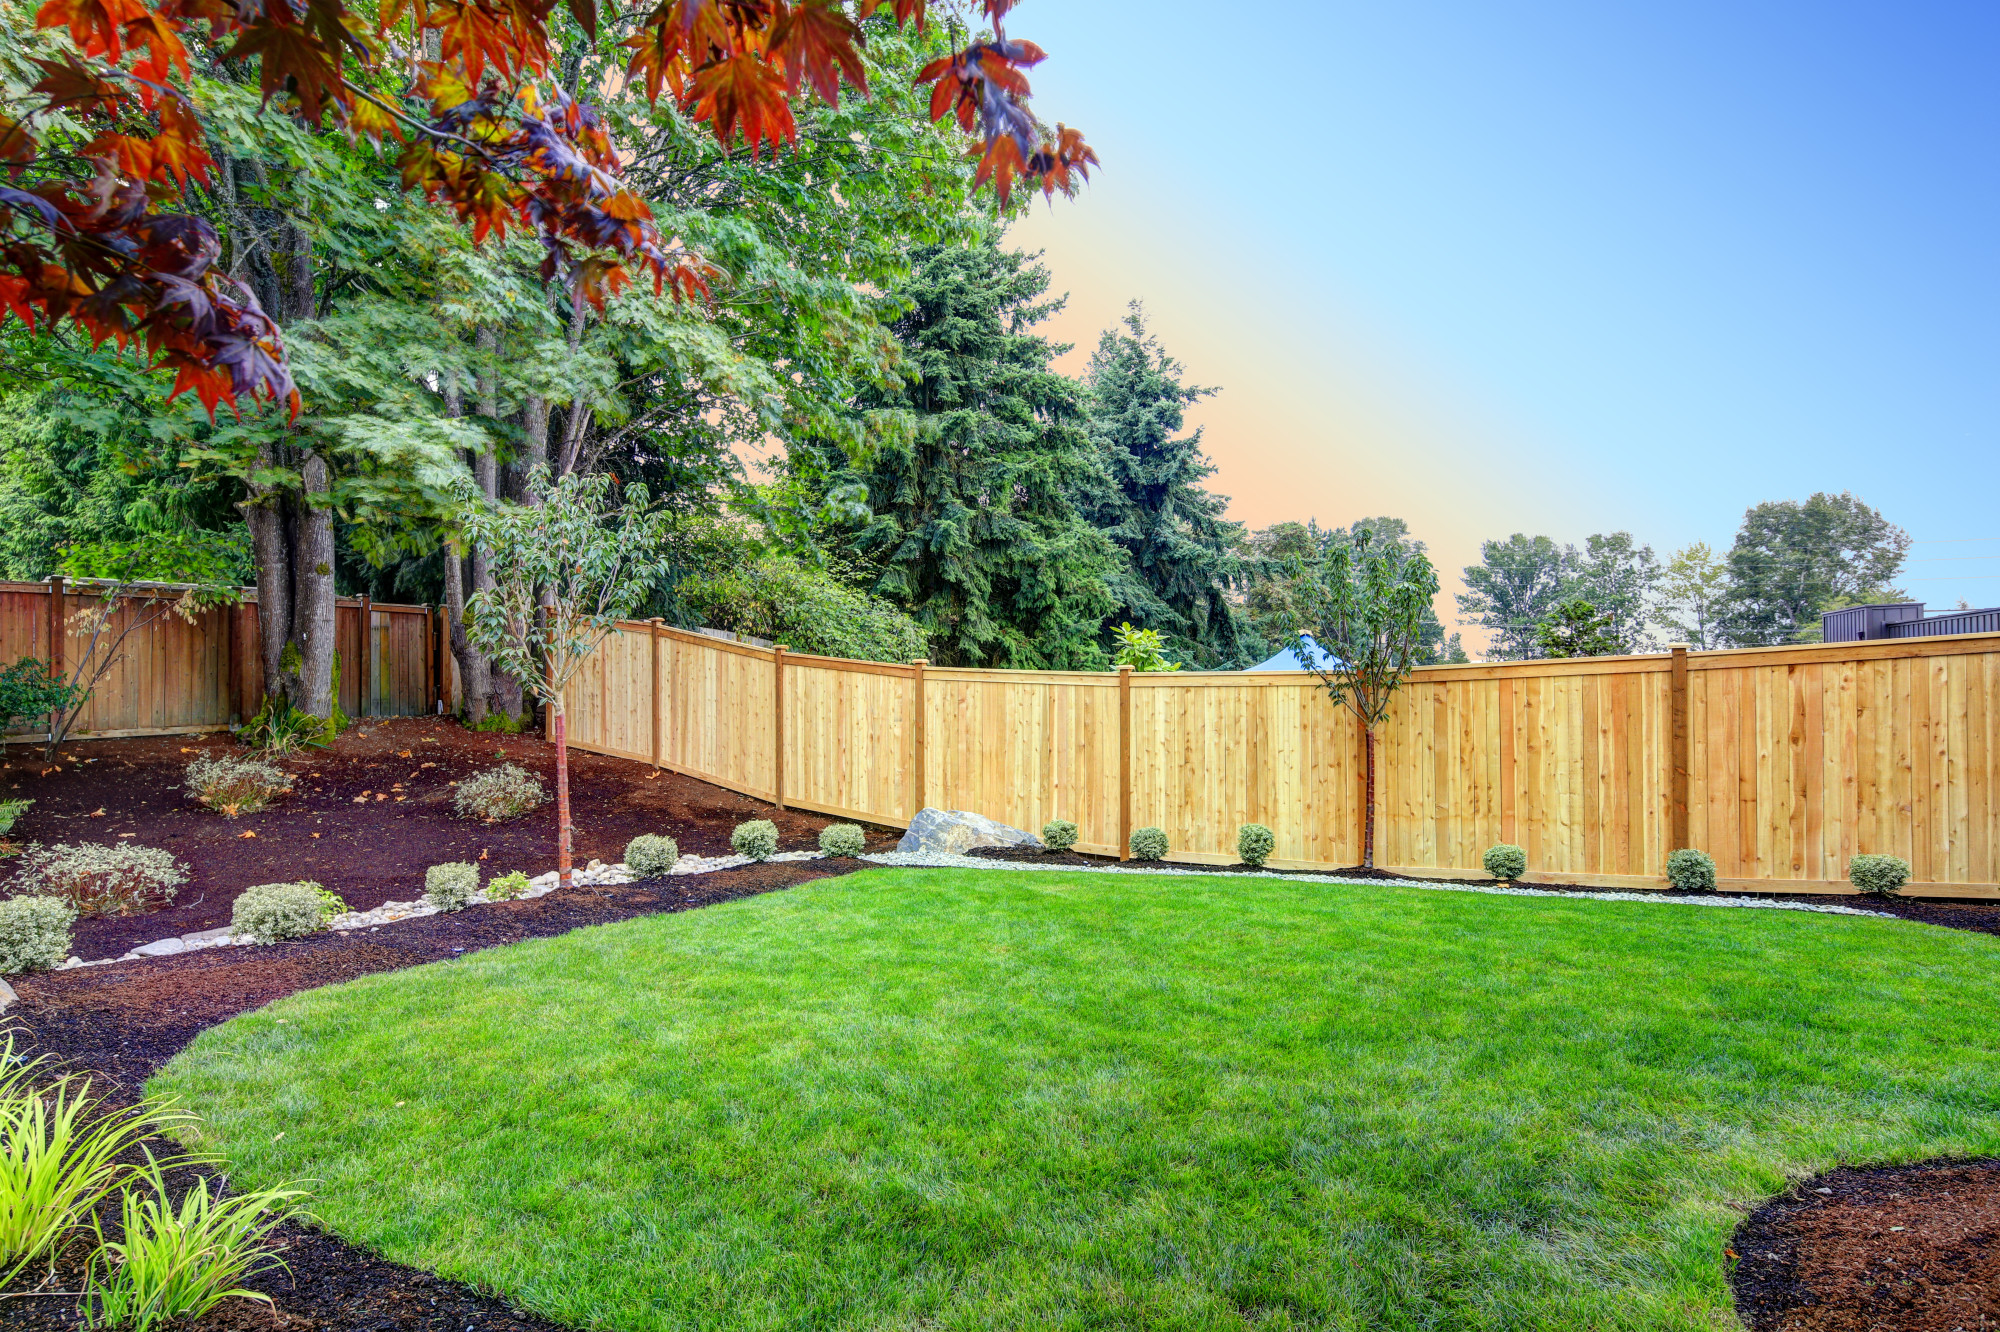 Are you wondering how to win yard of the month? If so, you've come to the right place. Read on for some more information.